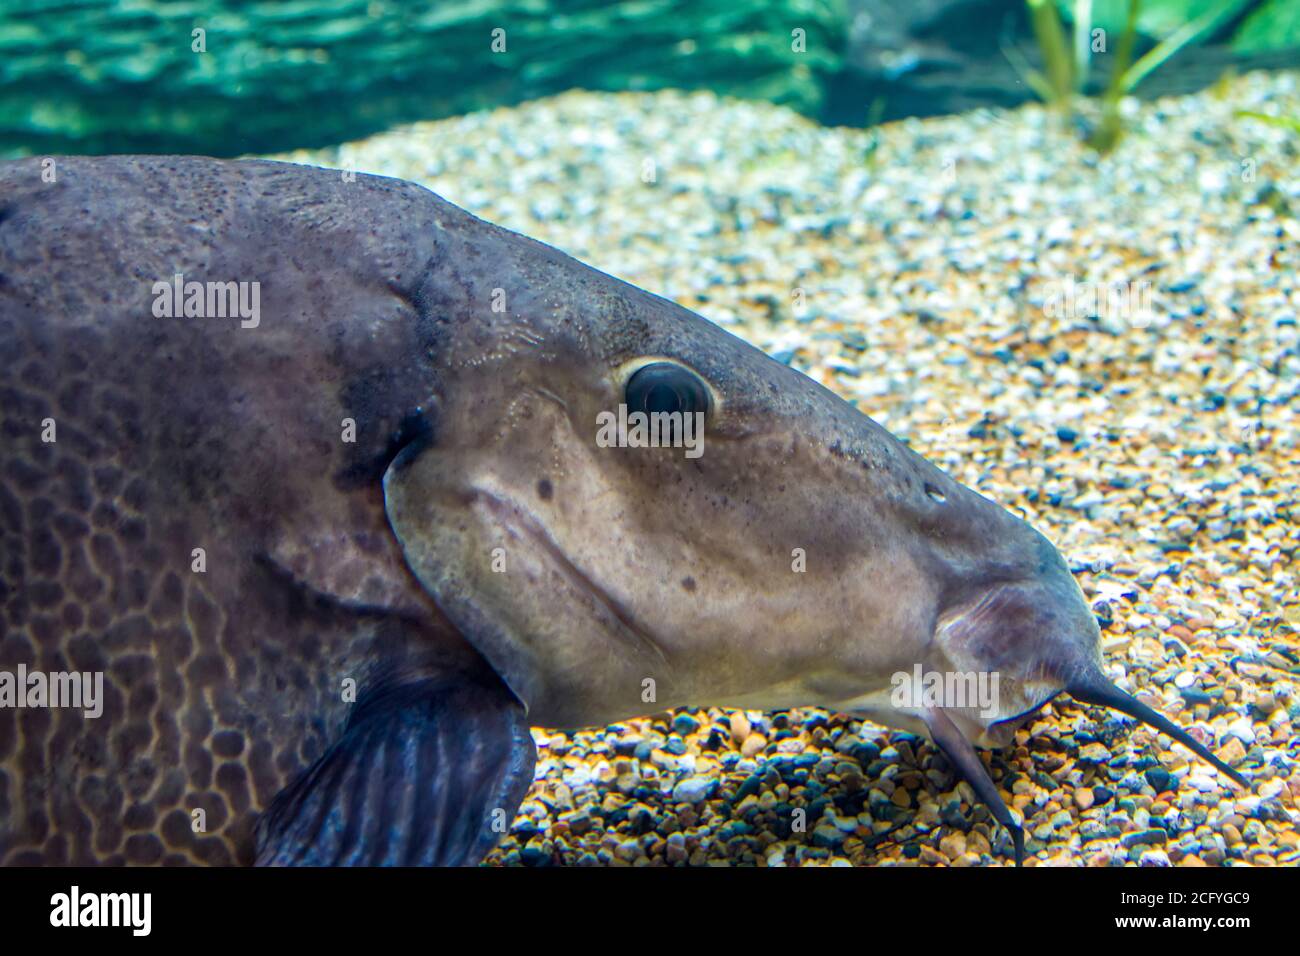 The giraffe catfish (Auchenoglanis occidentalis) is an African catfish. It eats plants off the floor of lakes and streams. Stock Photo